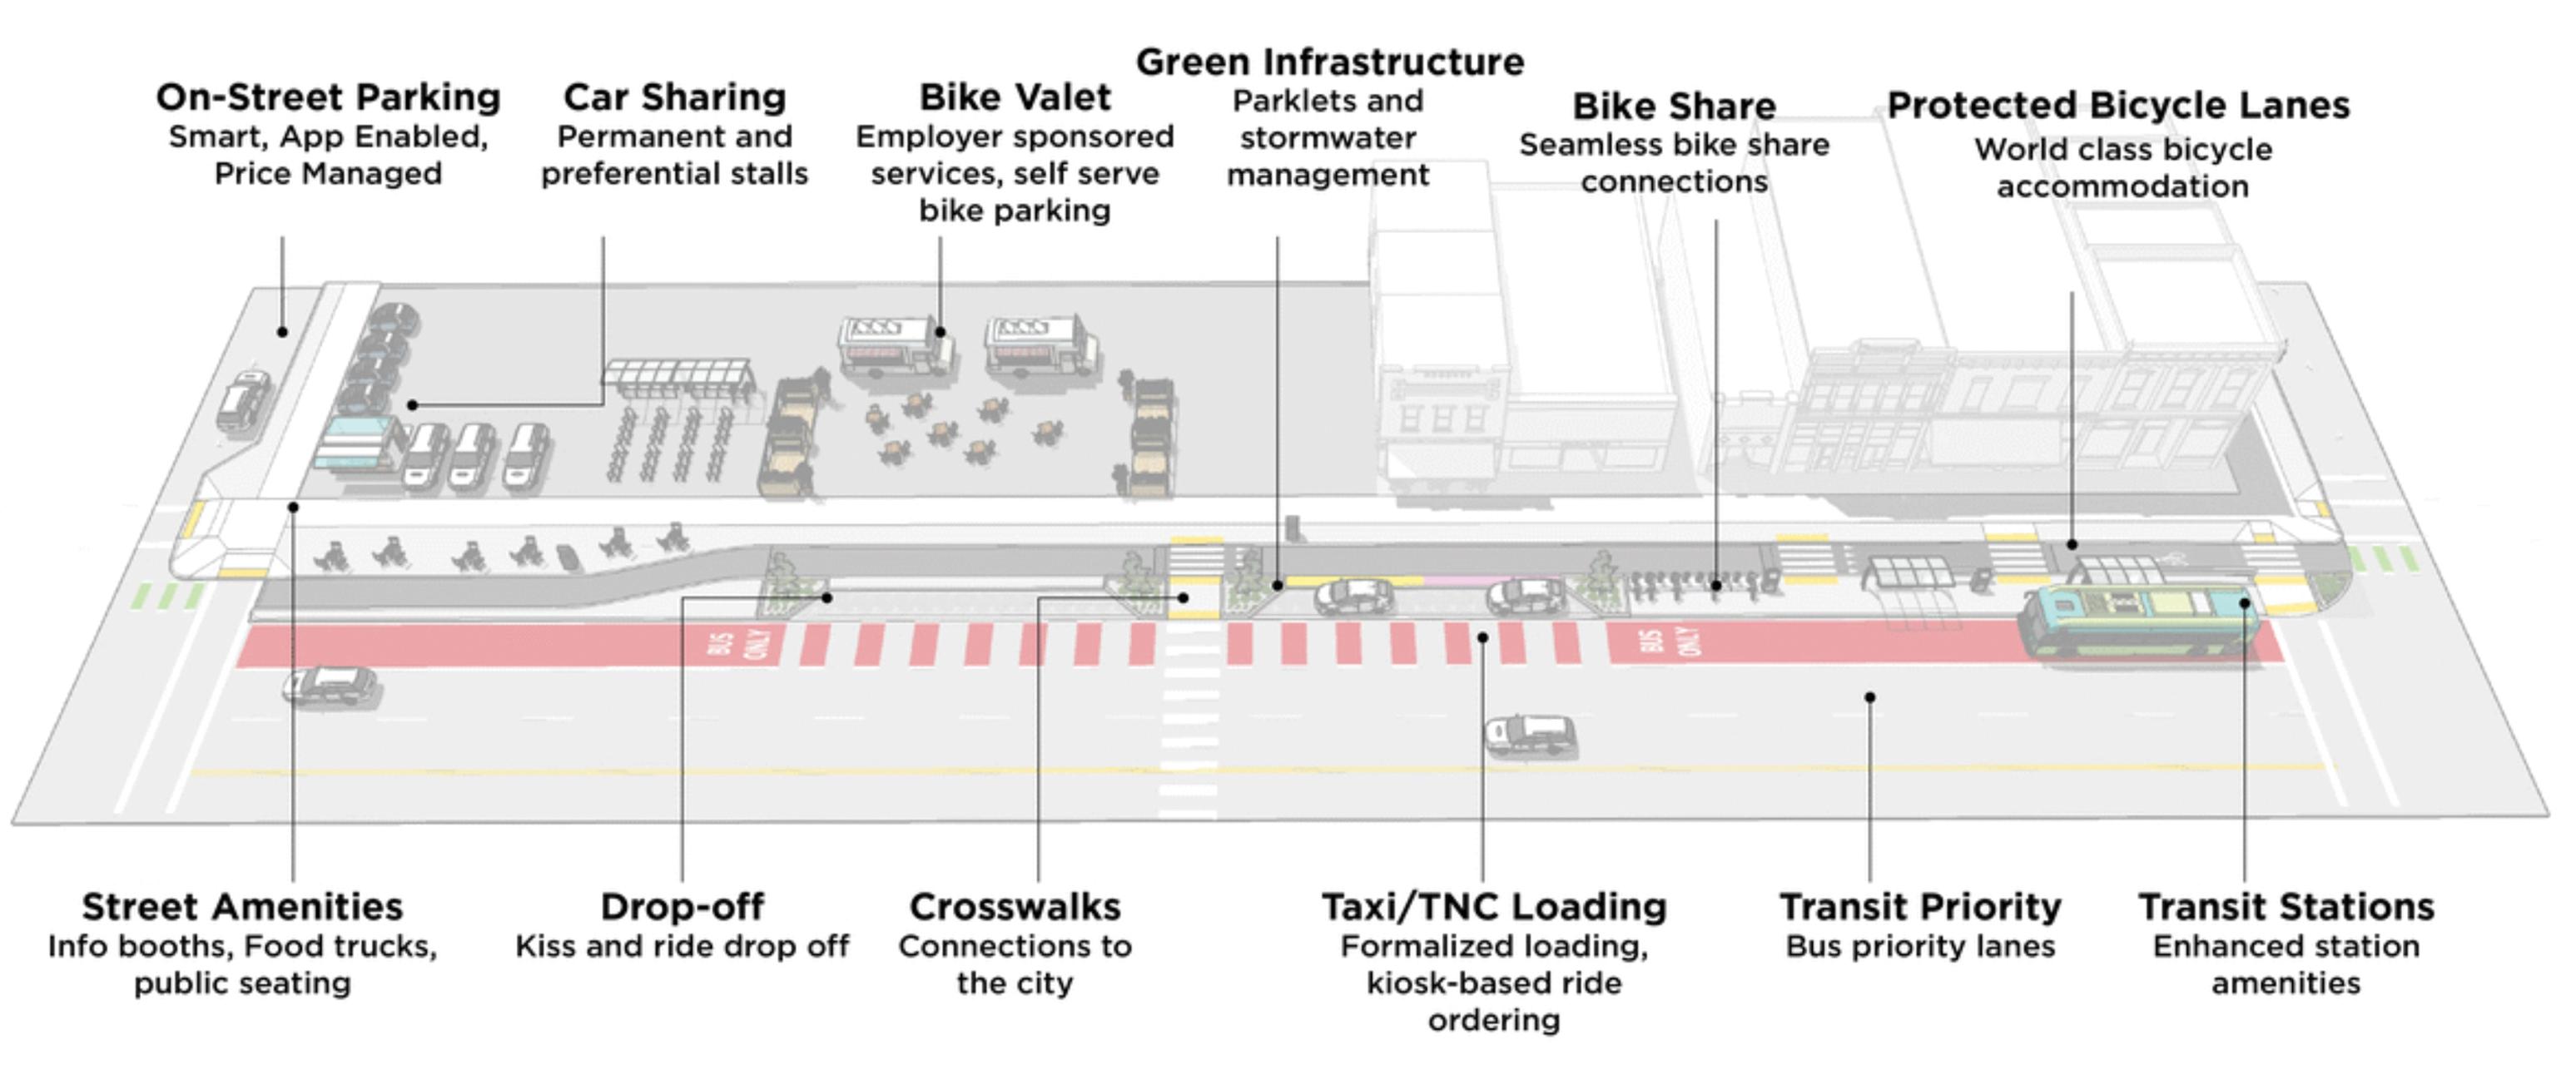 How streets could evolve to cater for new mobility services.
Source: Alta Planning